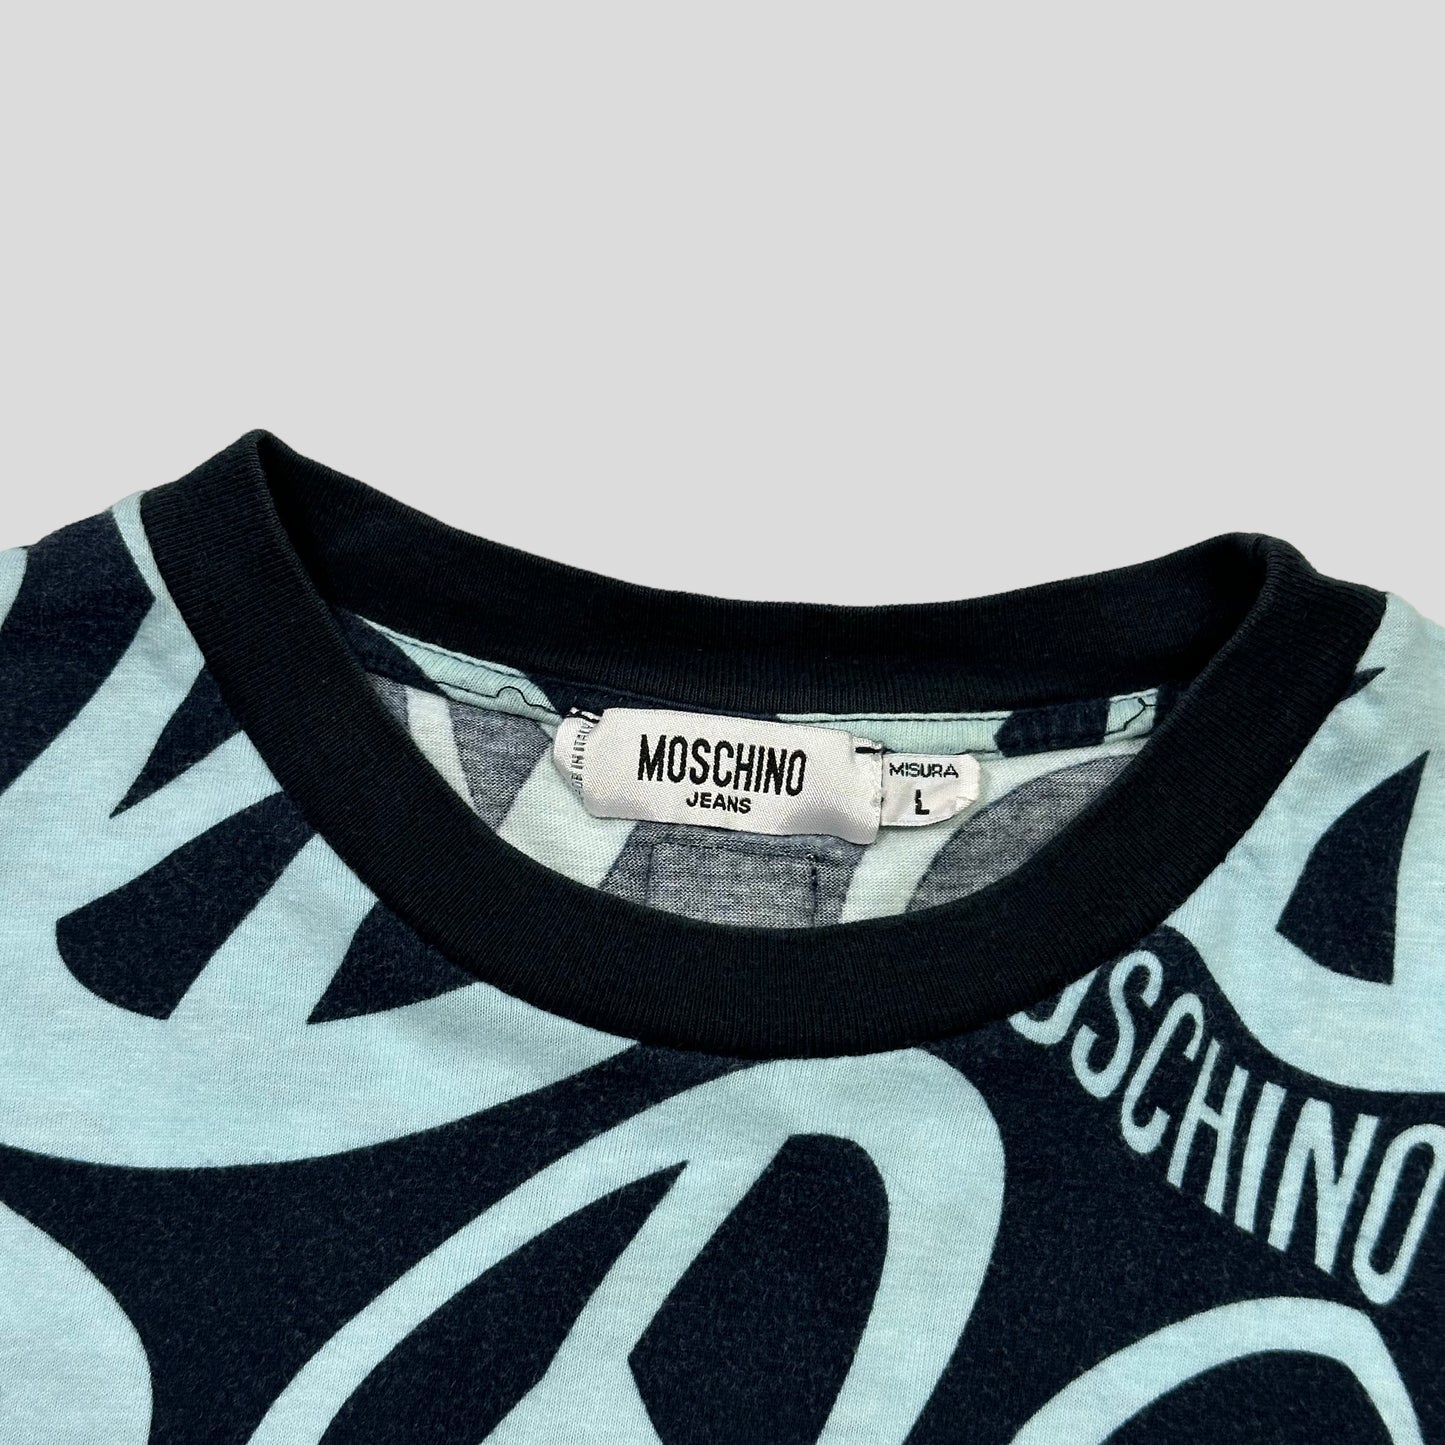 Moschino Jeans 00’s Melted Peace Logo T-shirt - S/M